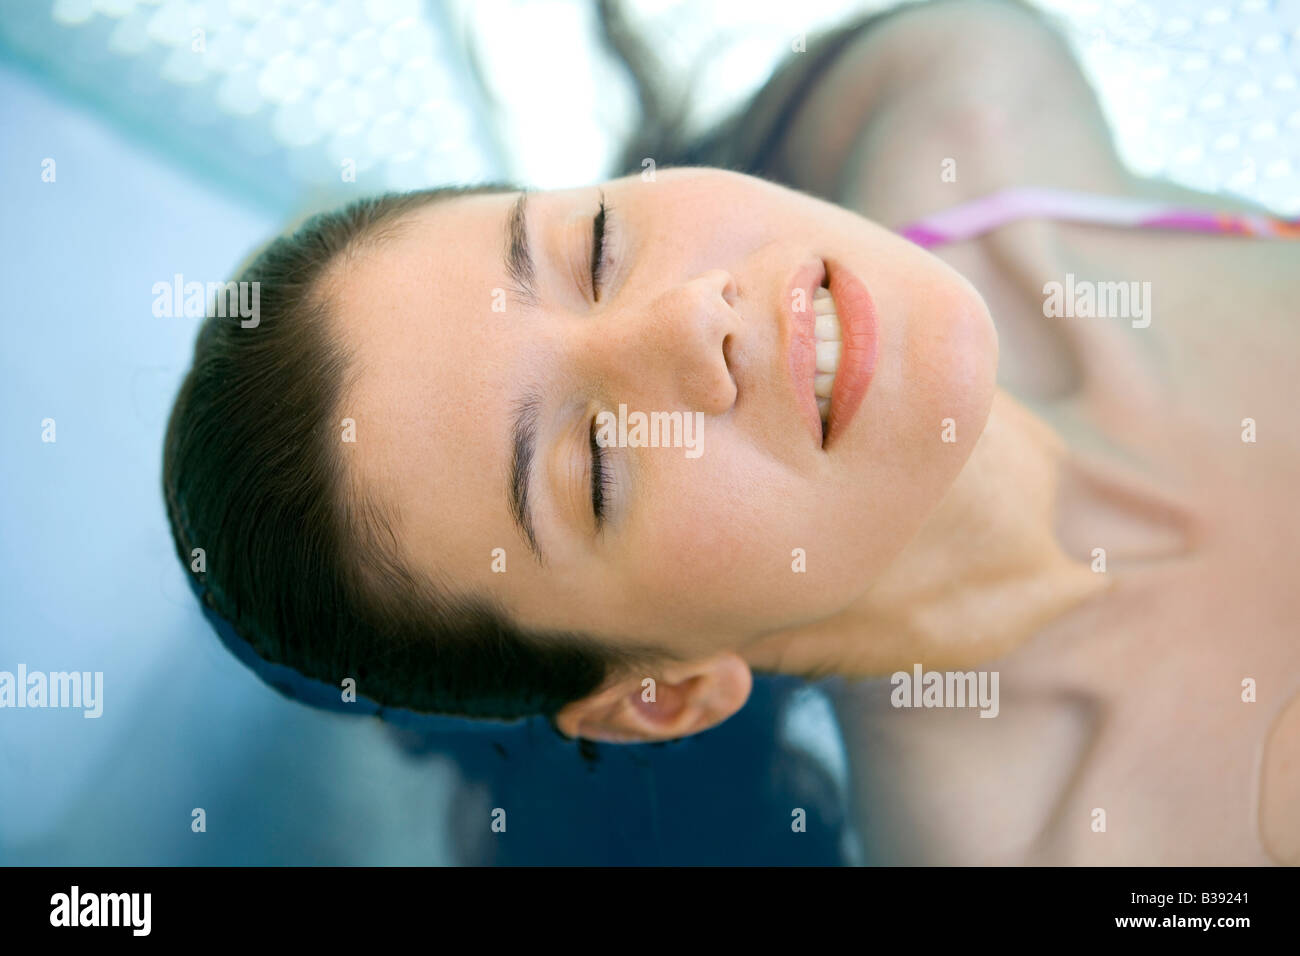 Junge Frau entspannt sich in einem Whirlpool, young woman relaxes in a Whirlpool Stock Photo